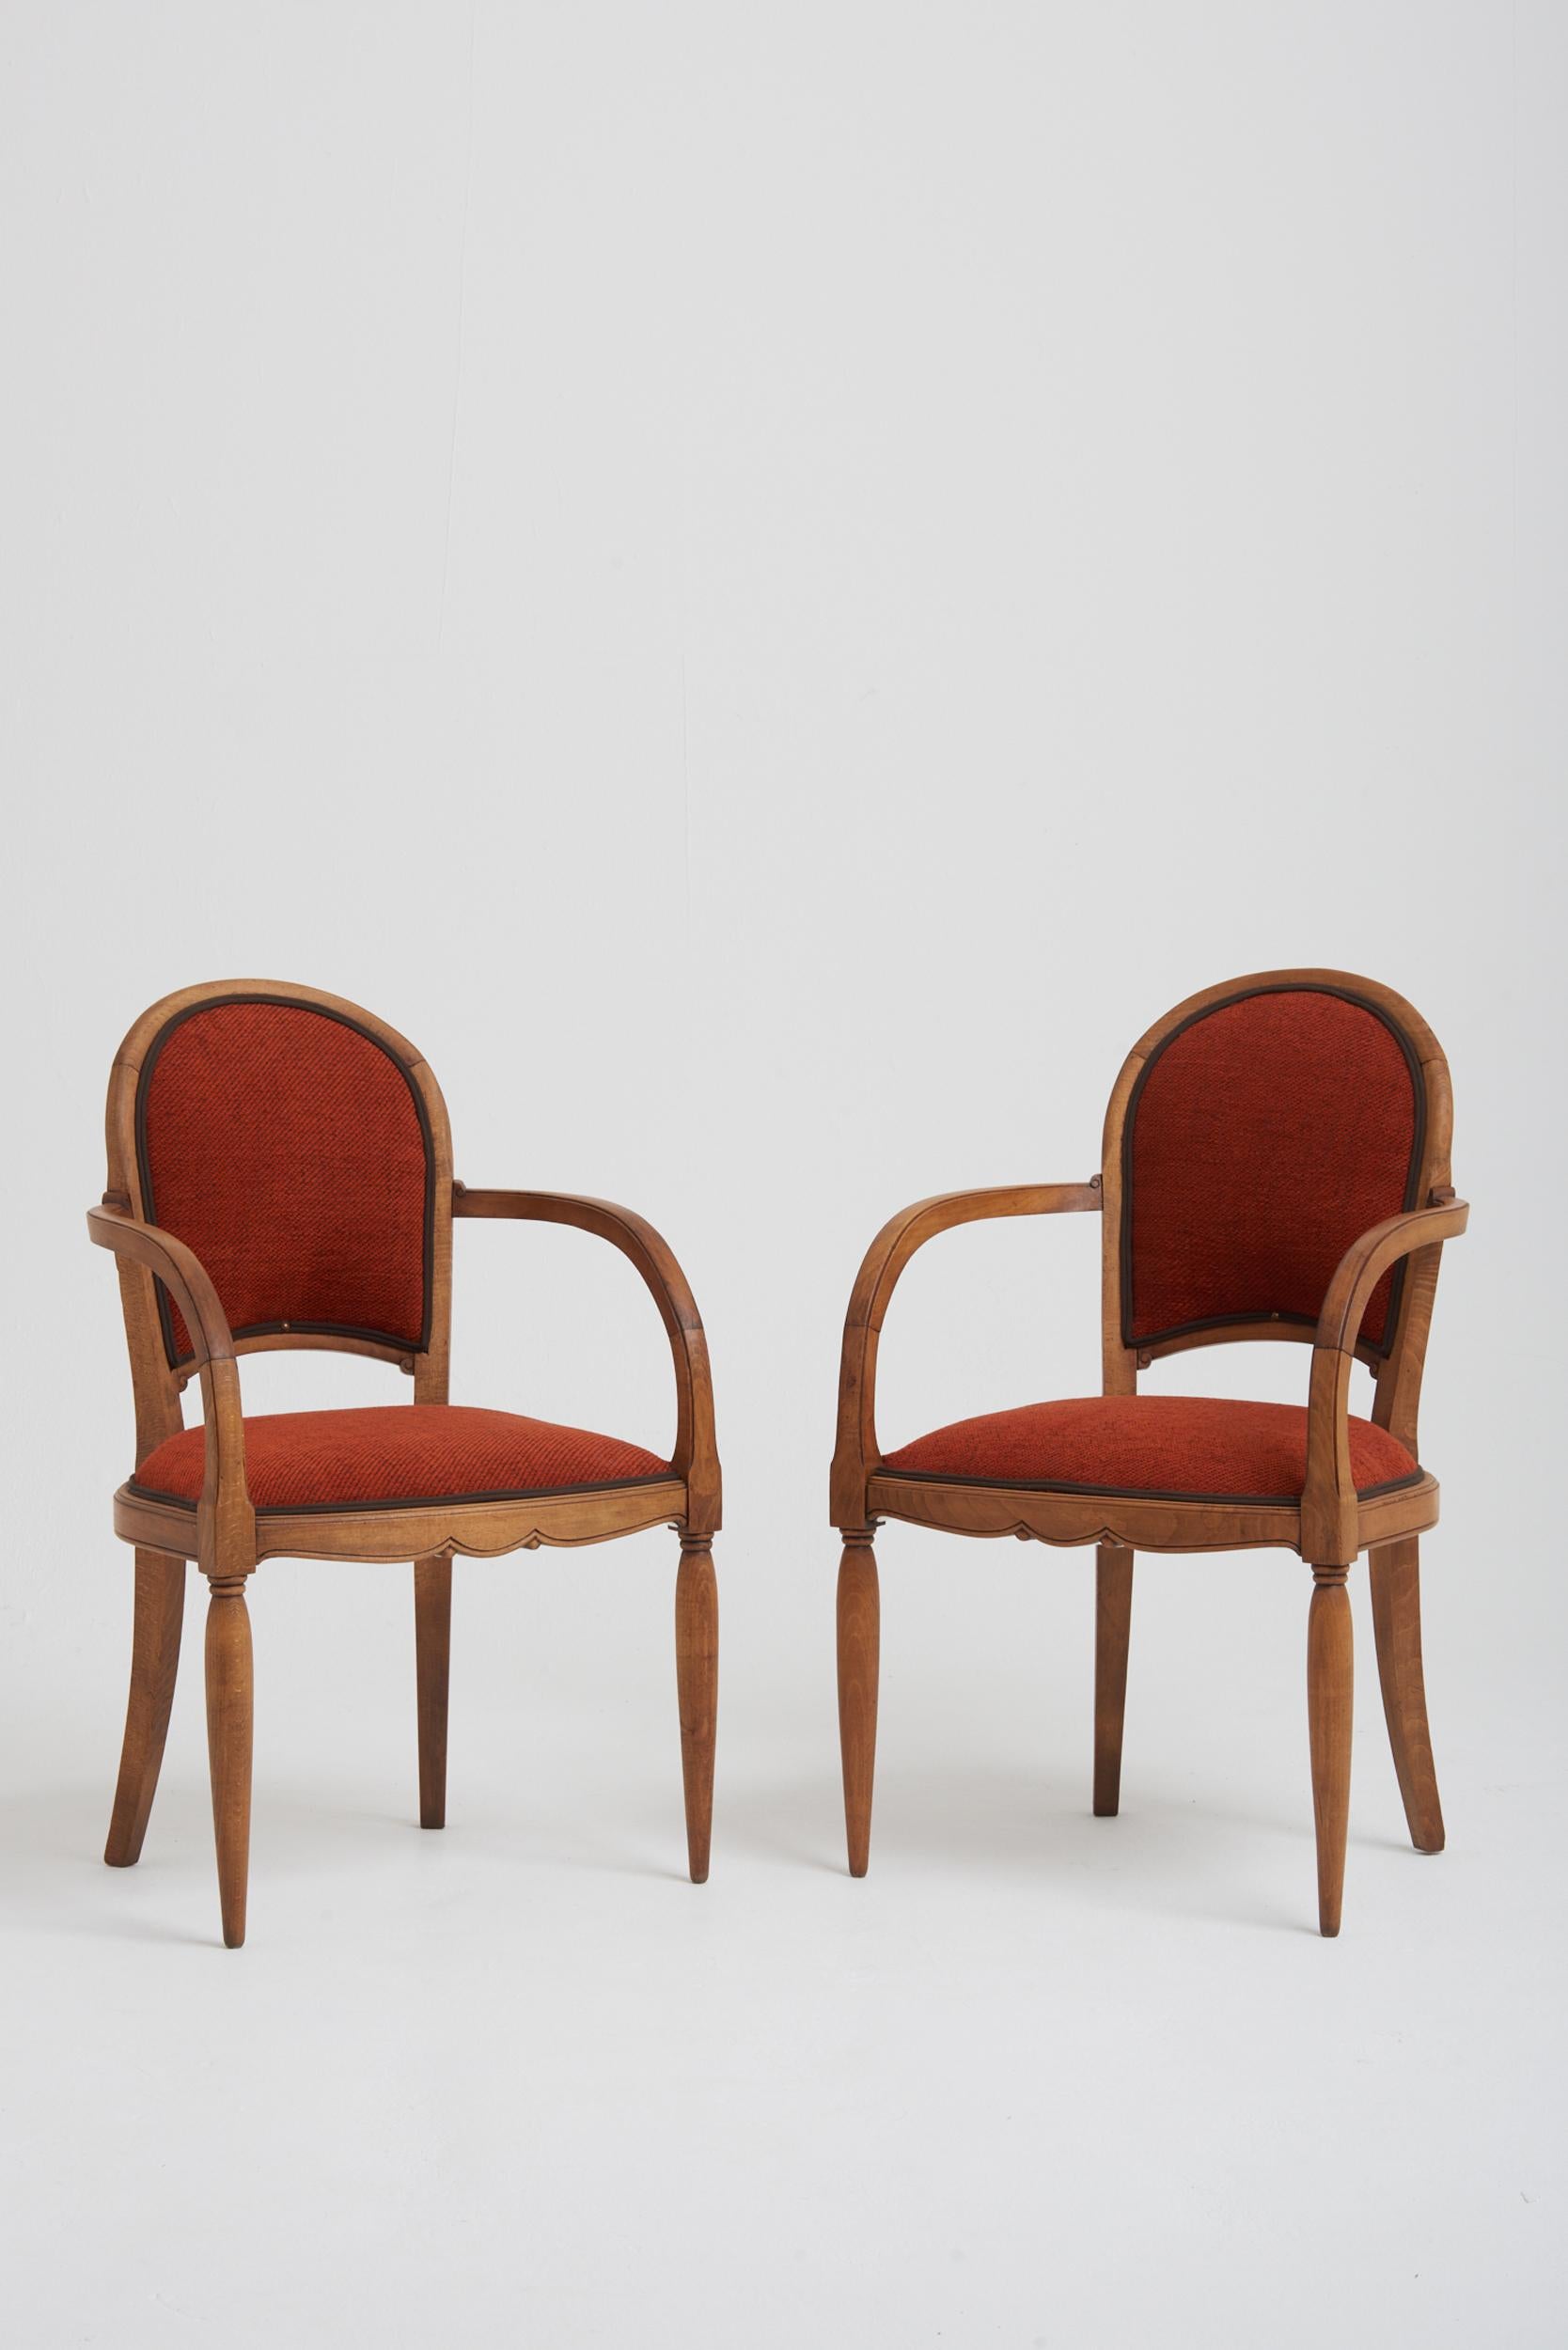 Pair of Art Deco armchairs.
France, circa 1920.
88.5 cm high by 53.5 cm wide by 53 cm depth, seat height 41 cm.